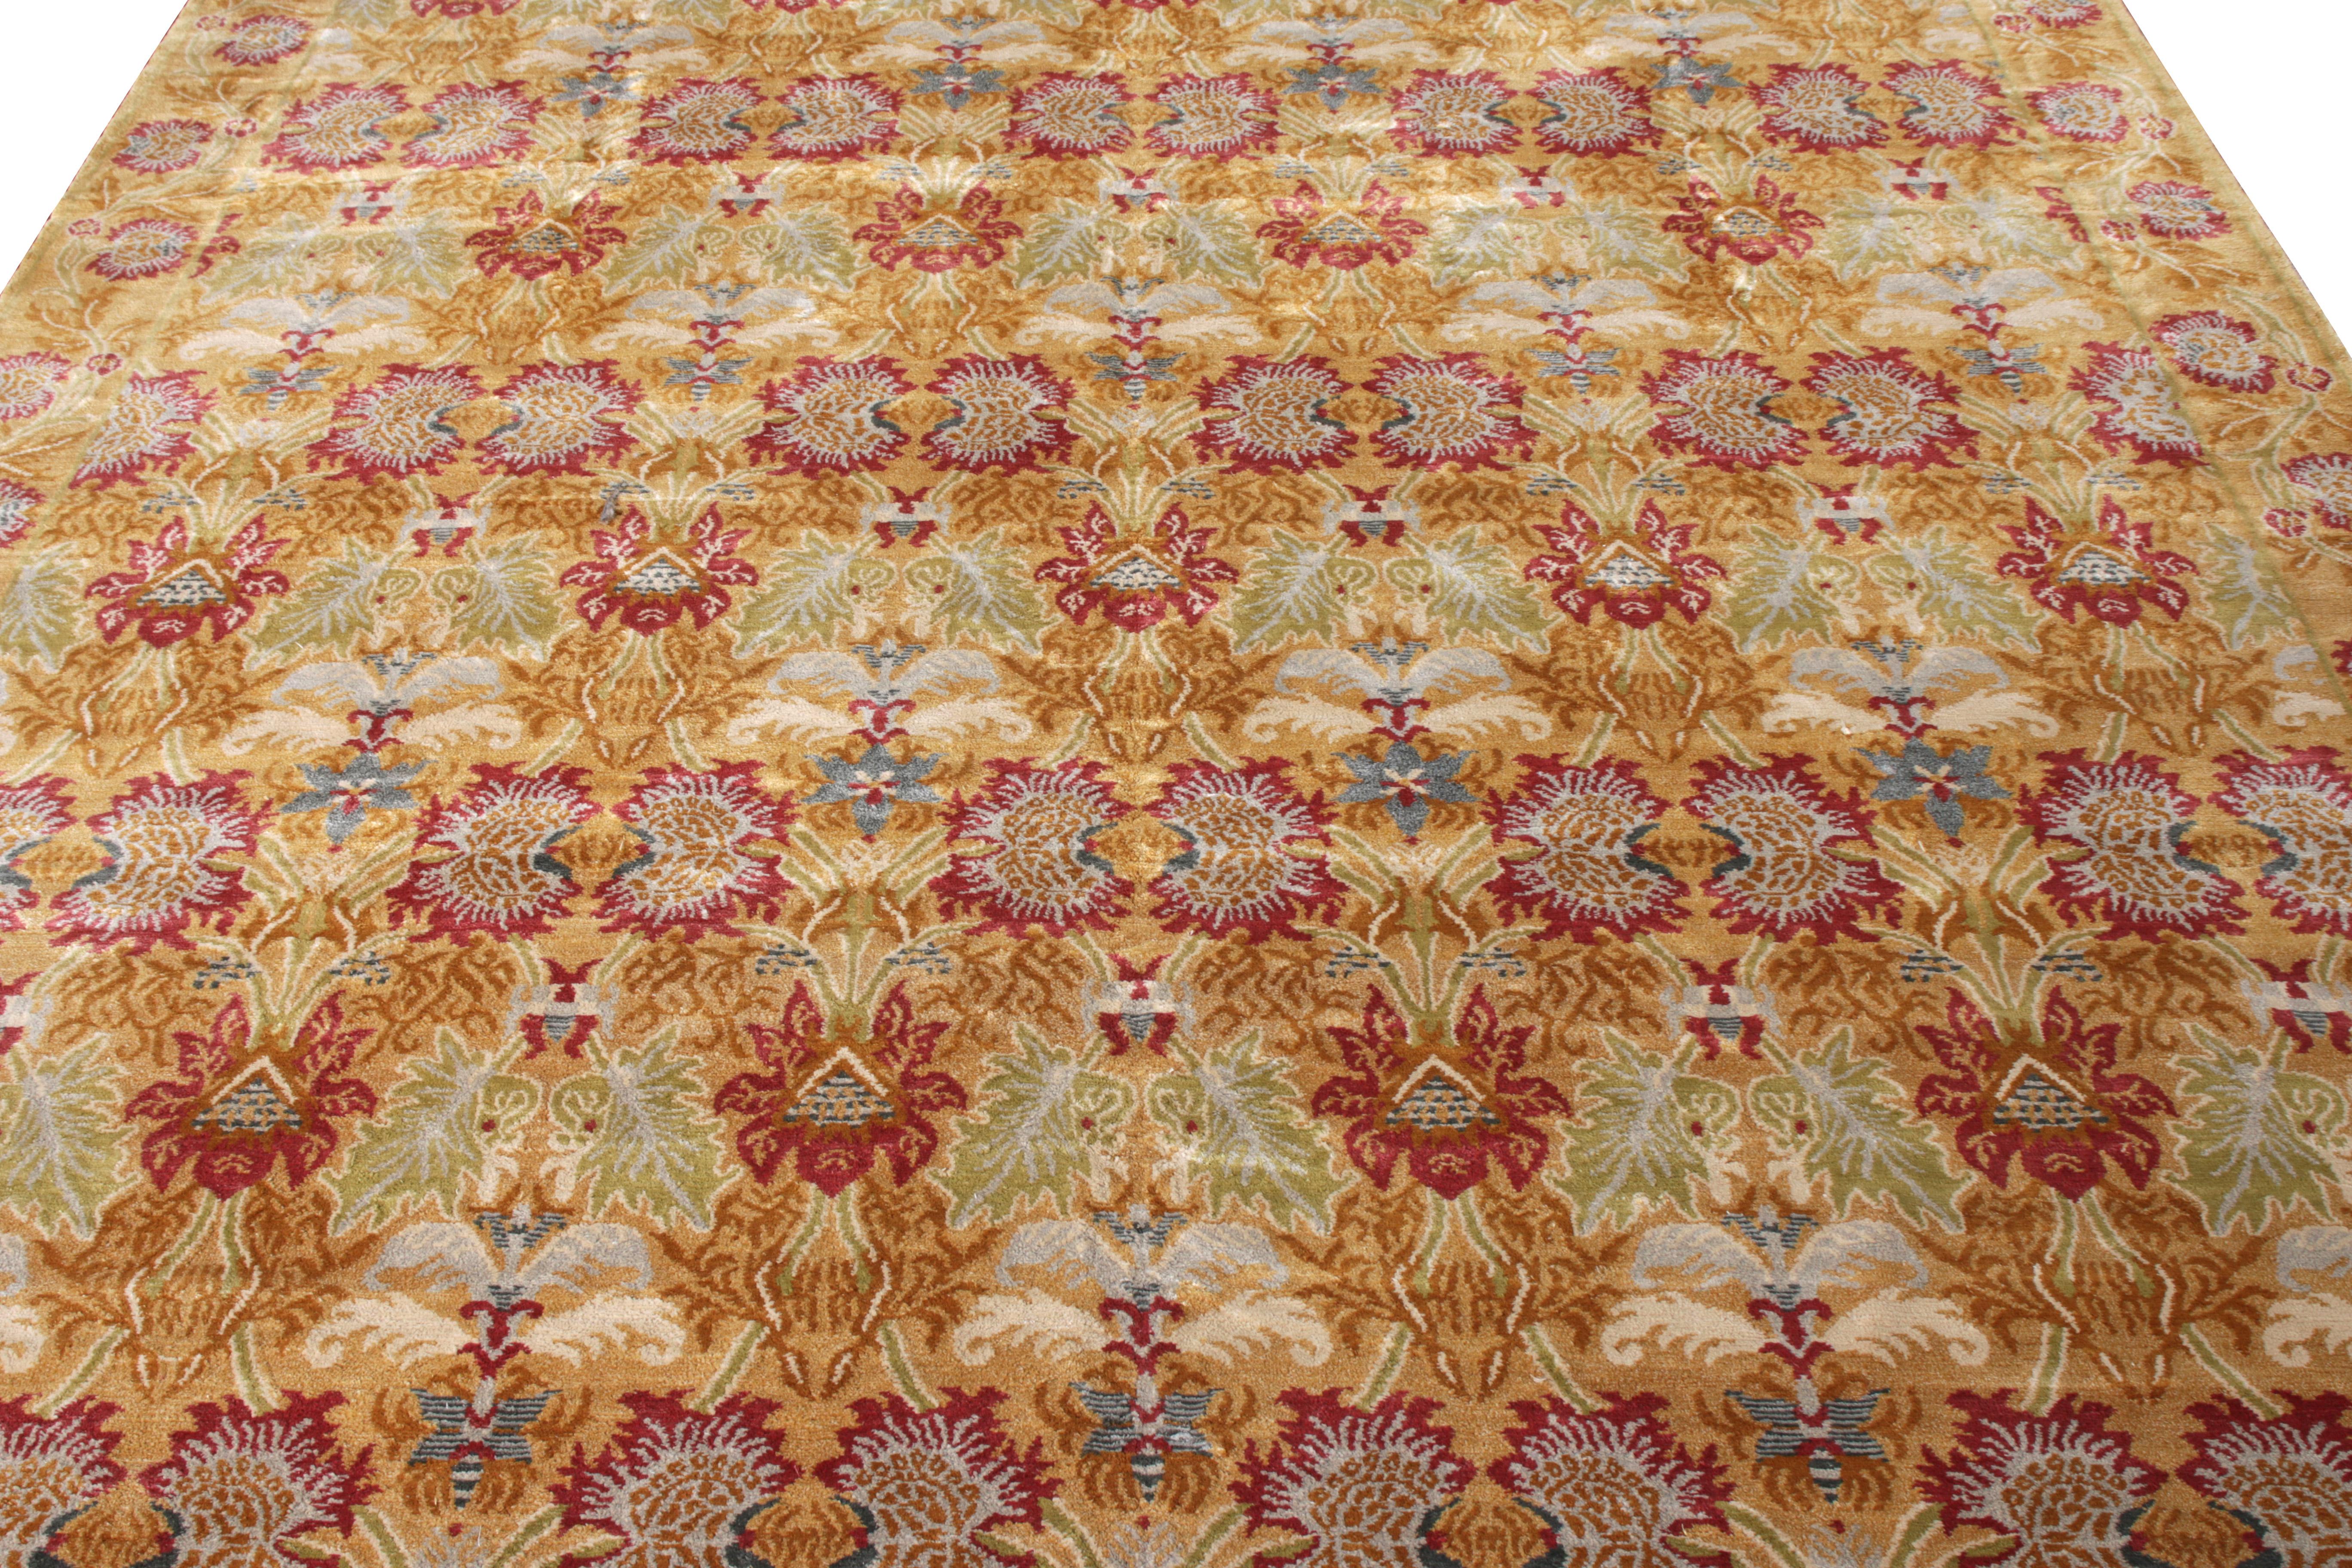 Art Deco Rug & Kilim’s European Style Rug in Gold and Red All Over Floral Pattern For Sale